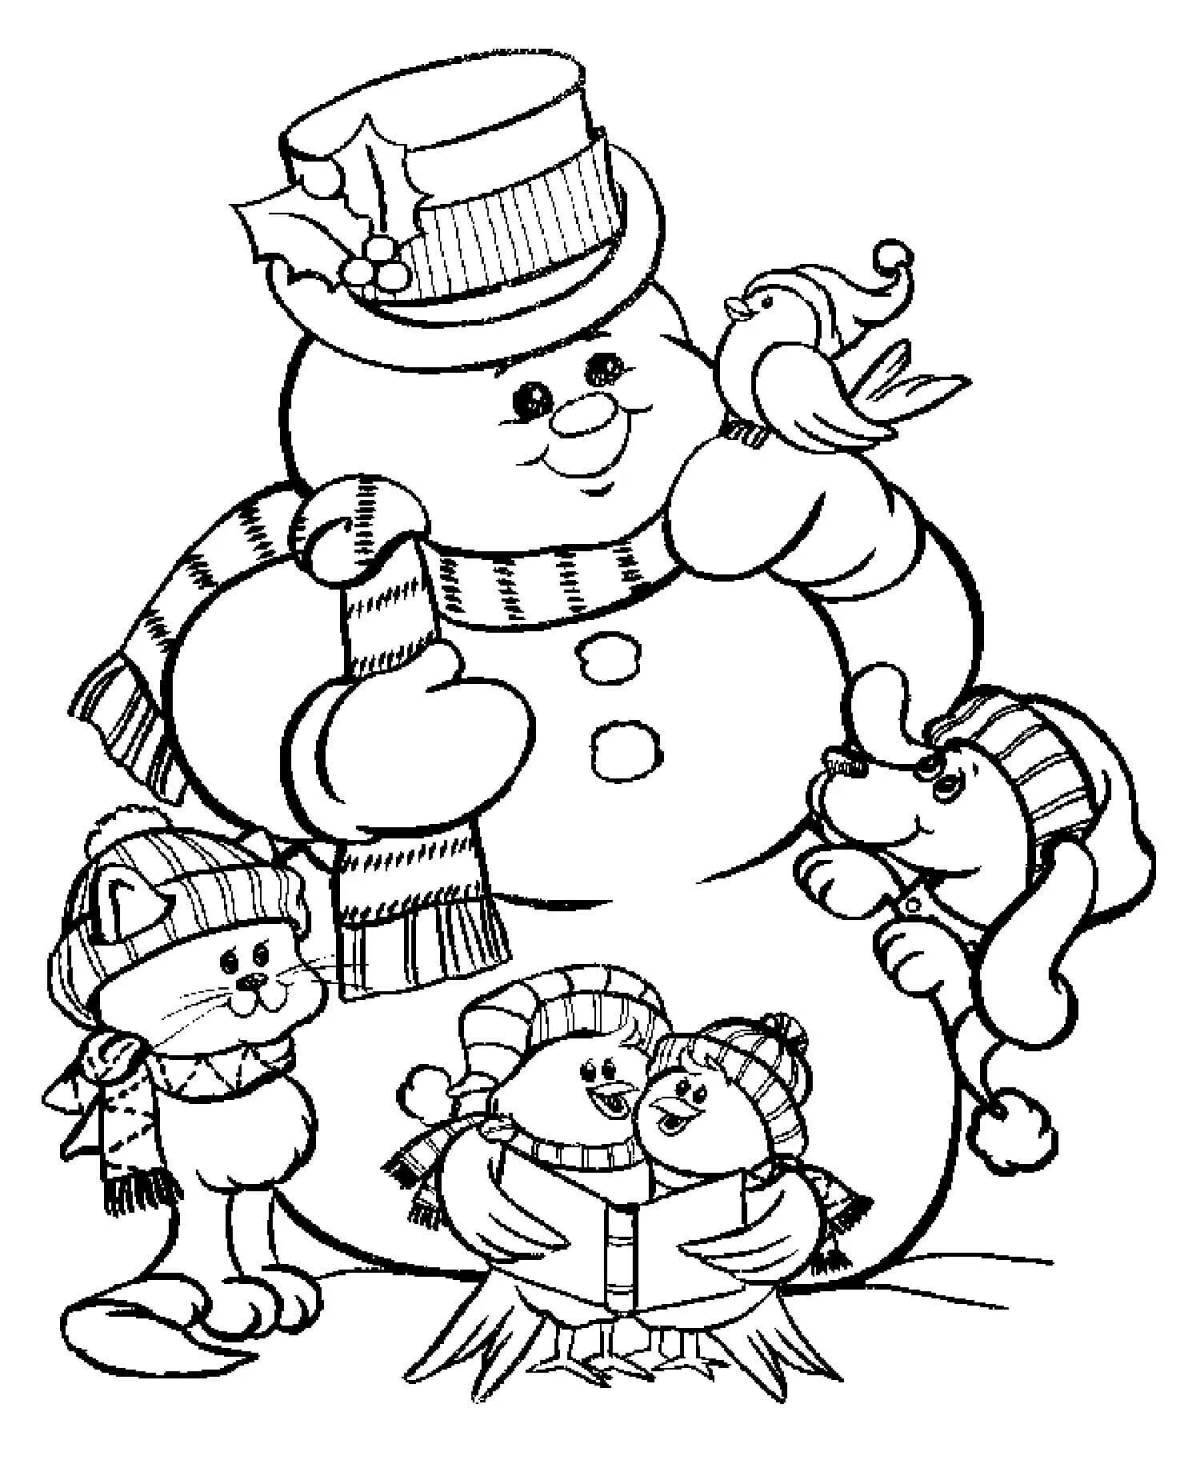 Coloring page playful big snowman